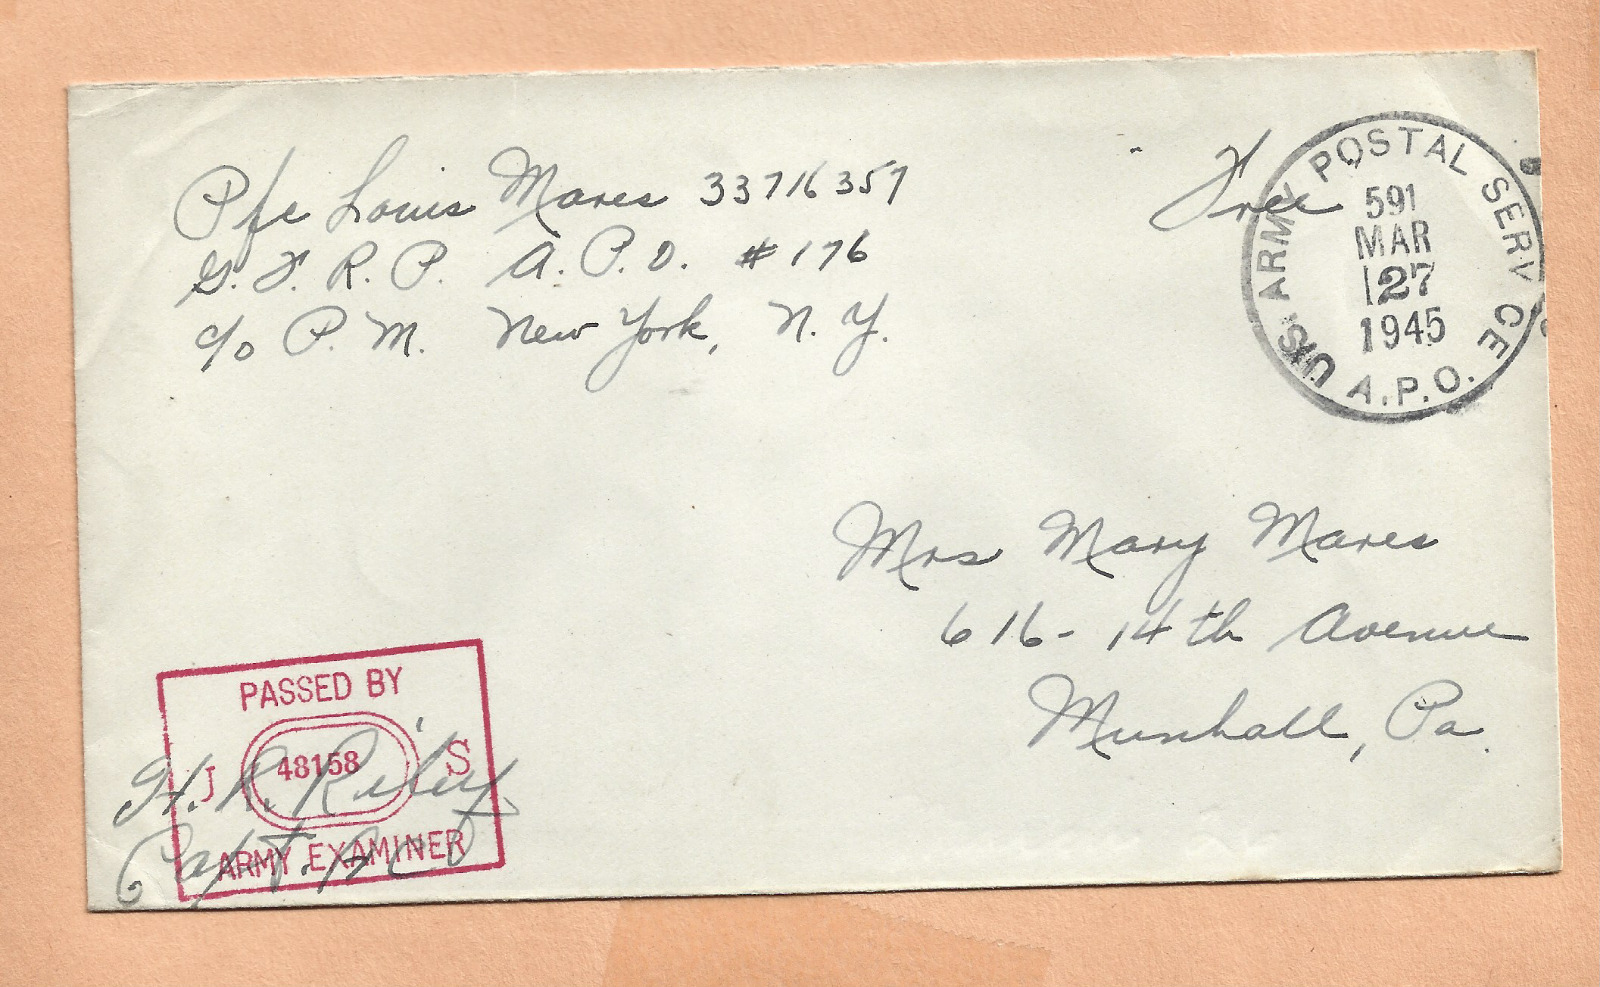 WORLD WAR II MILITARY MAIL APO 176 1945  CENSORED LE BOURGET  FRANCE